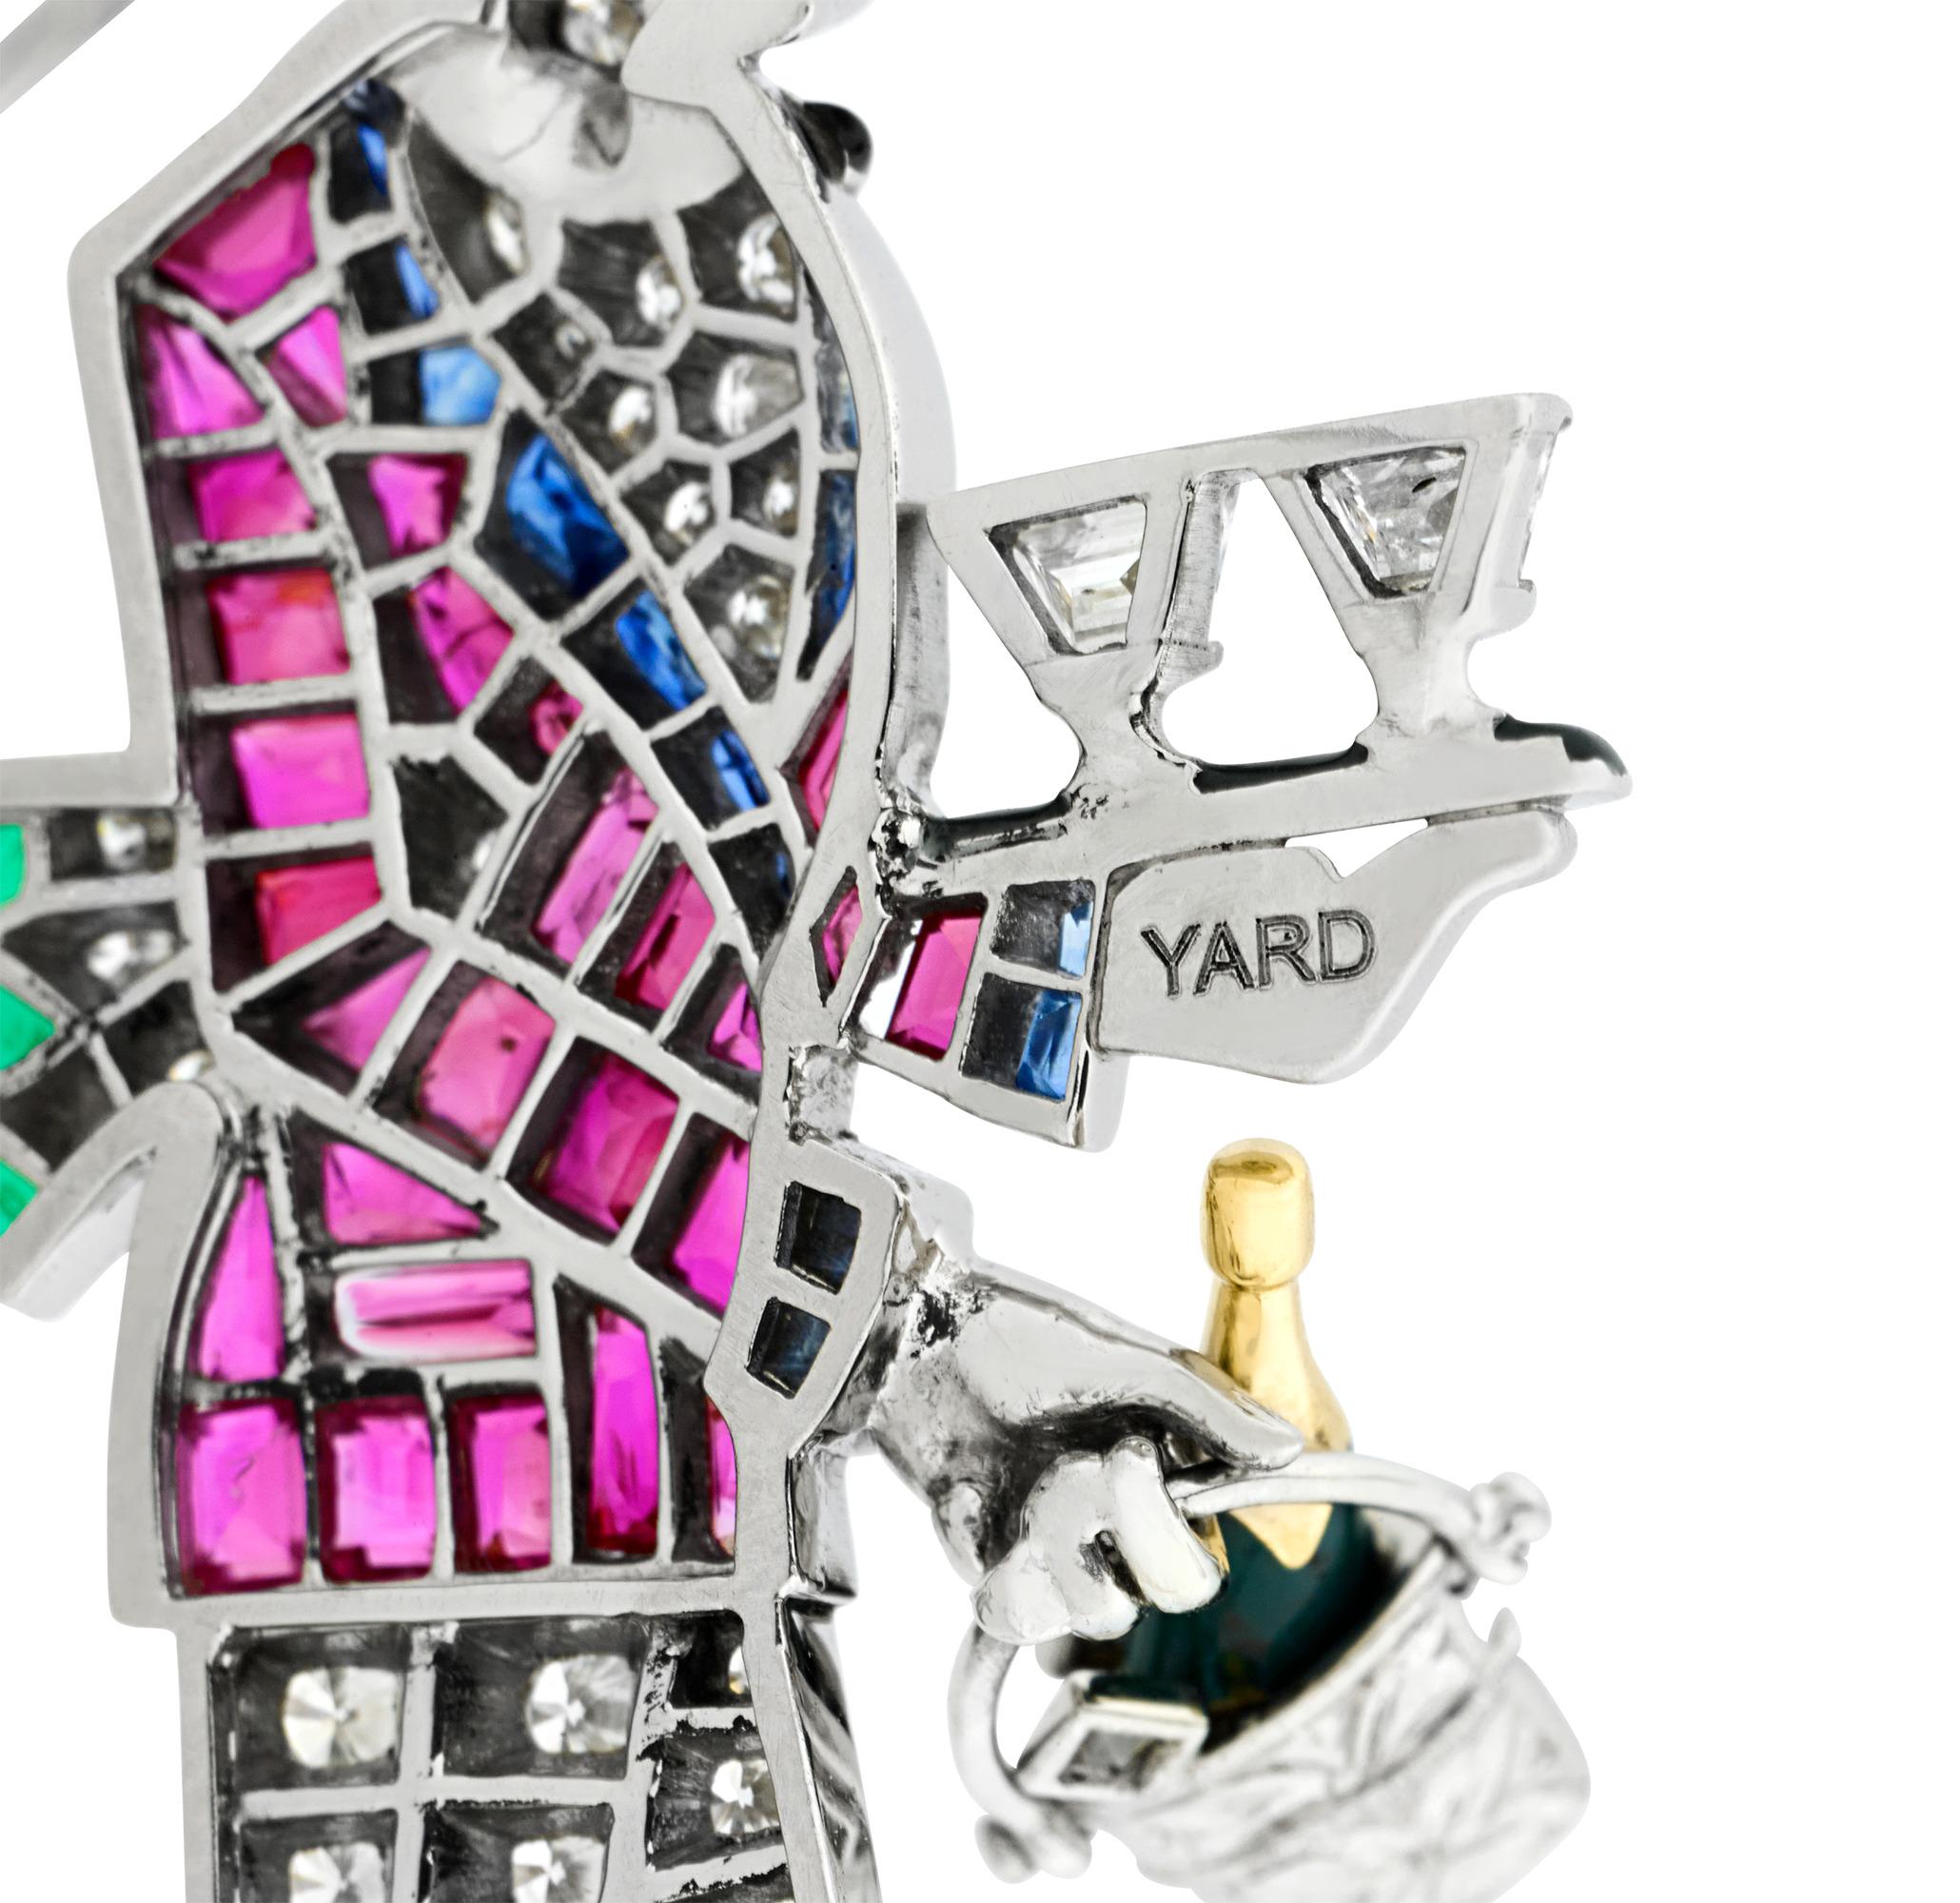 One of the esteemed Raymond Yard's most iconic and collectible designs, the rabbit waiter brooch epitomizes the Art Deco jeweler's unparalleled creativity and craftsmanship. First created in 1929 as a playful poke at Prohibition-era policies, this